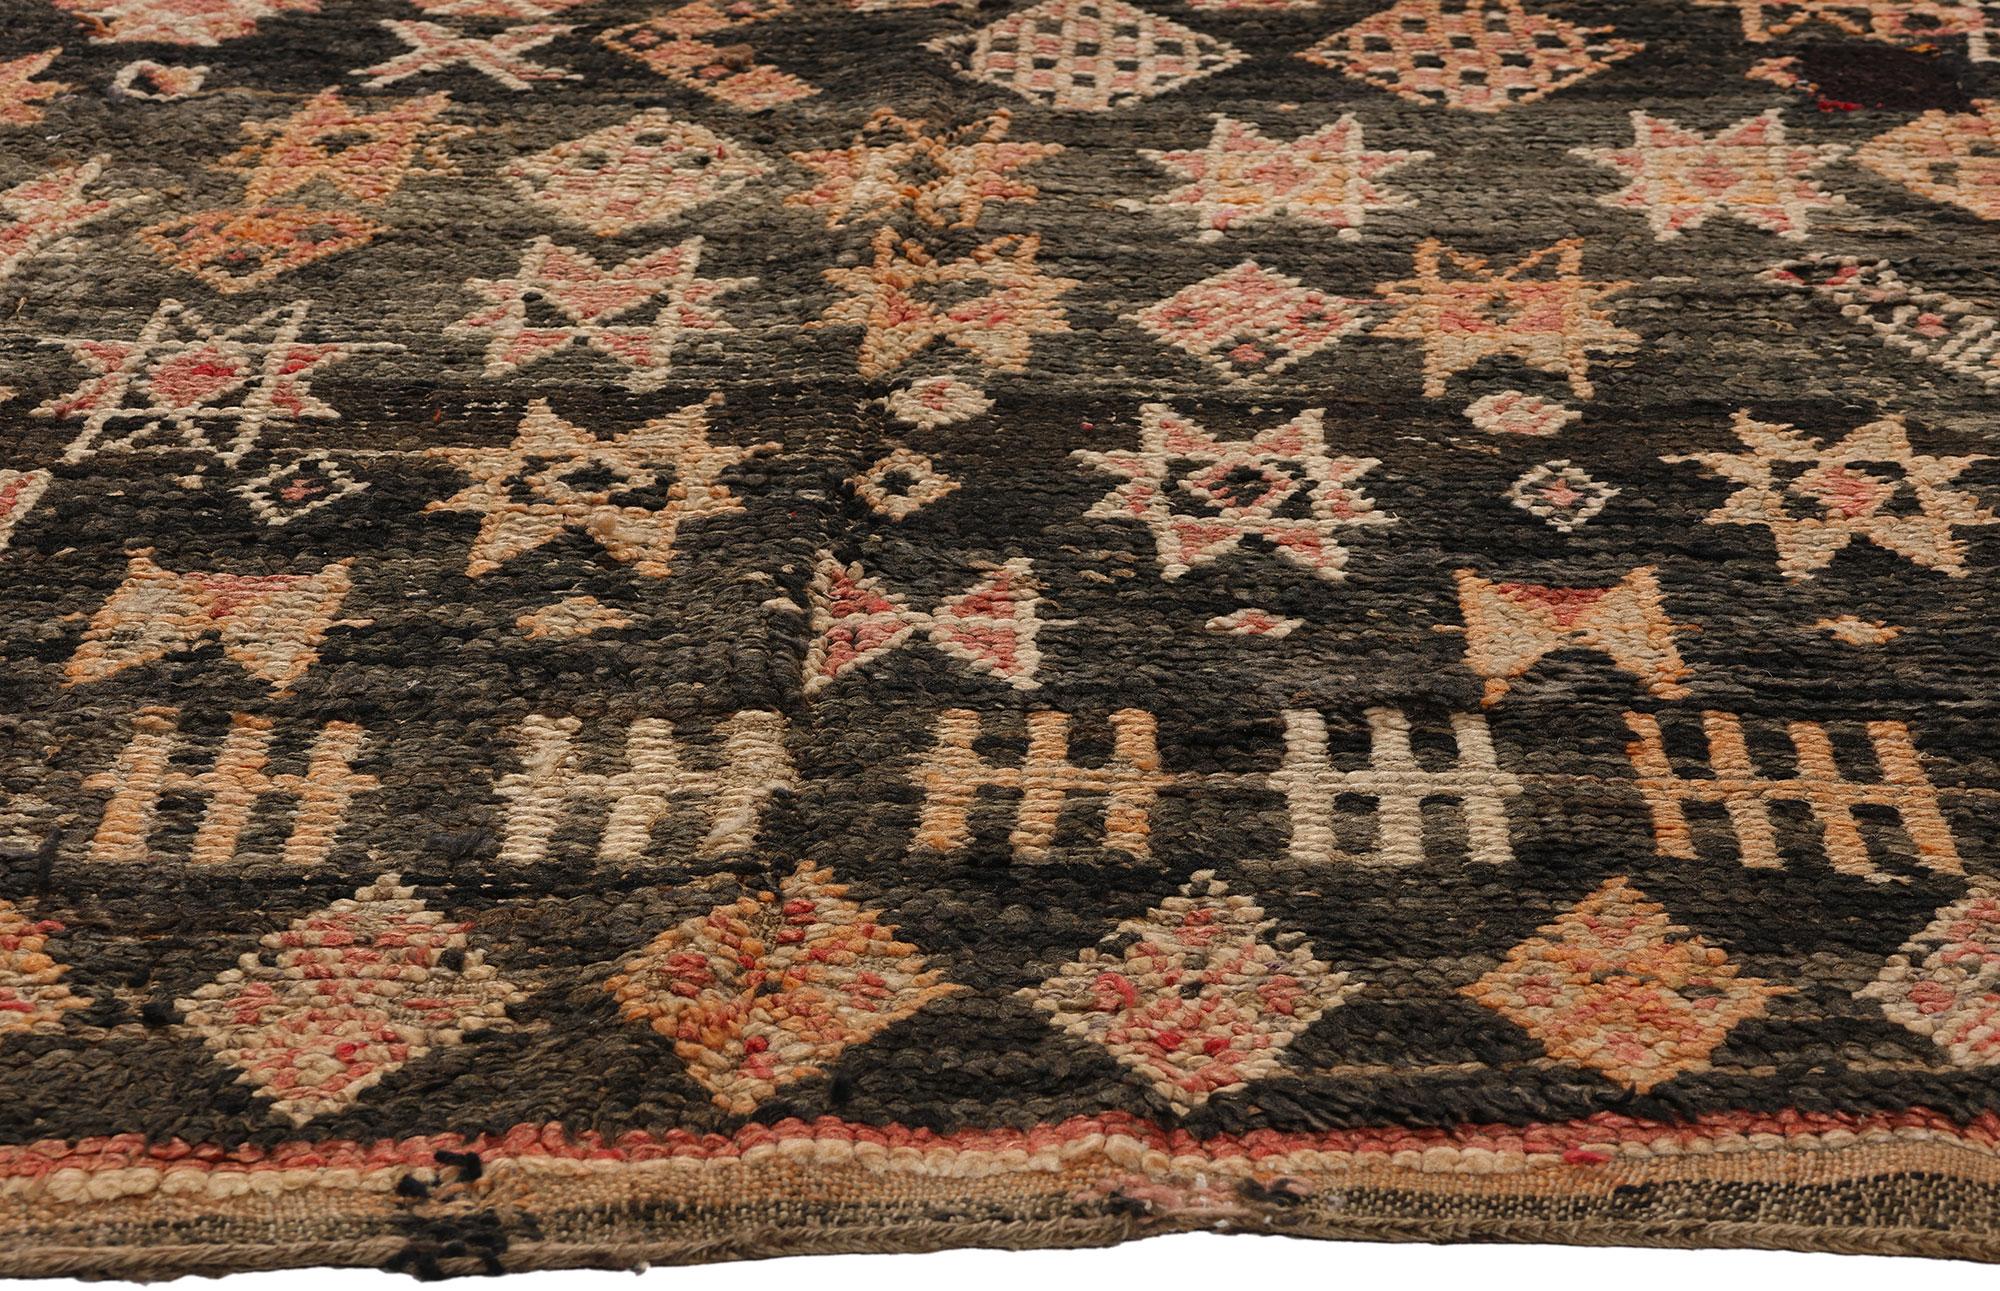 Vintage Beni Mrirt Moroccan Rug, Cozy Nomad Meets Bohemian Enchantment In Good Condition For Sale In Dallas, TX